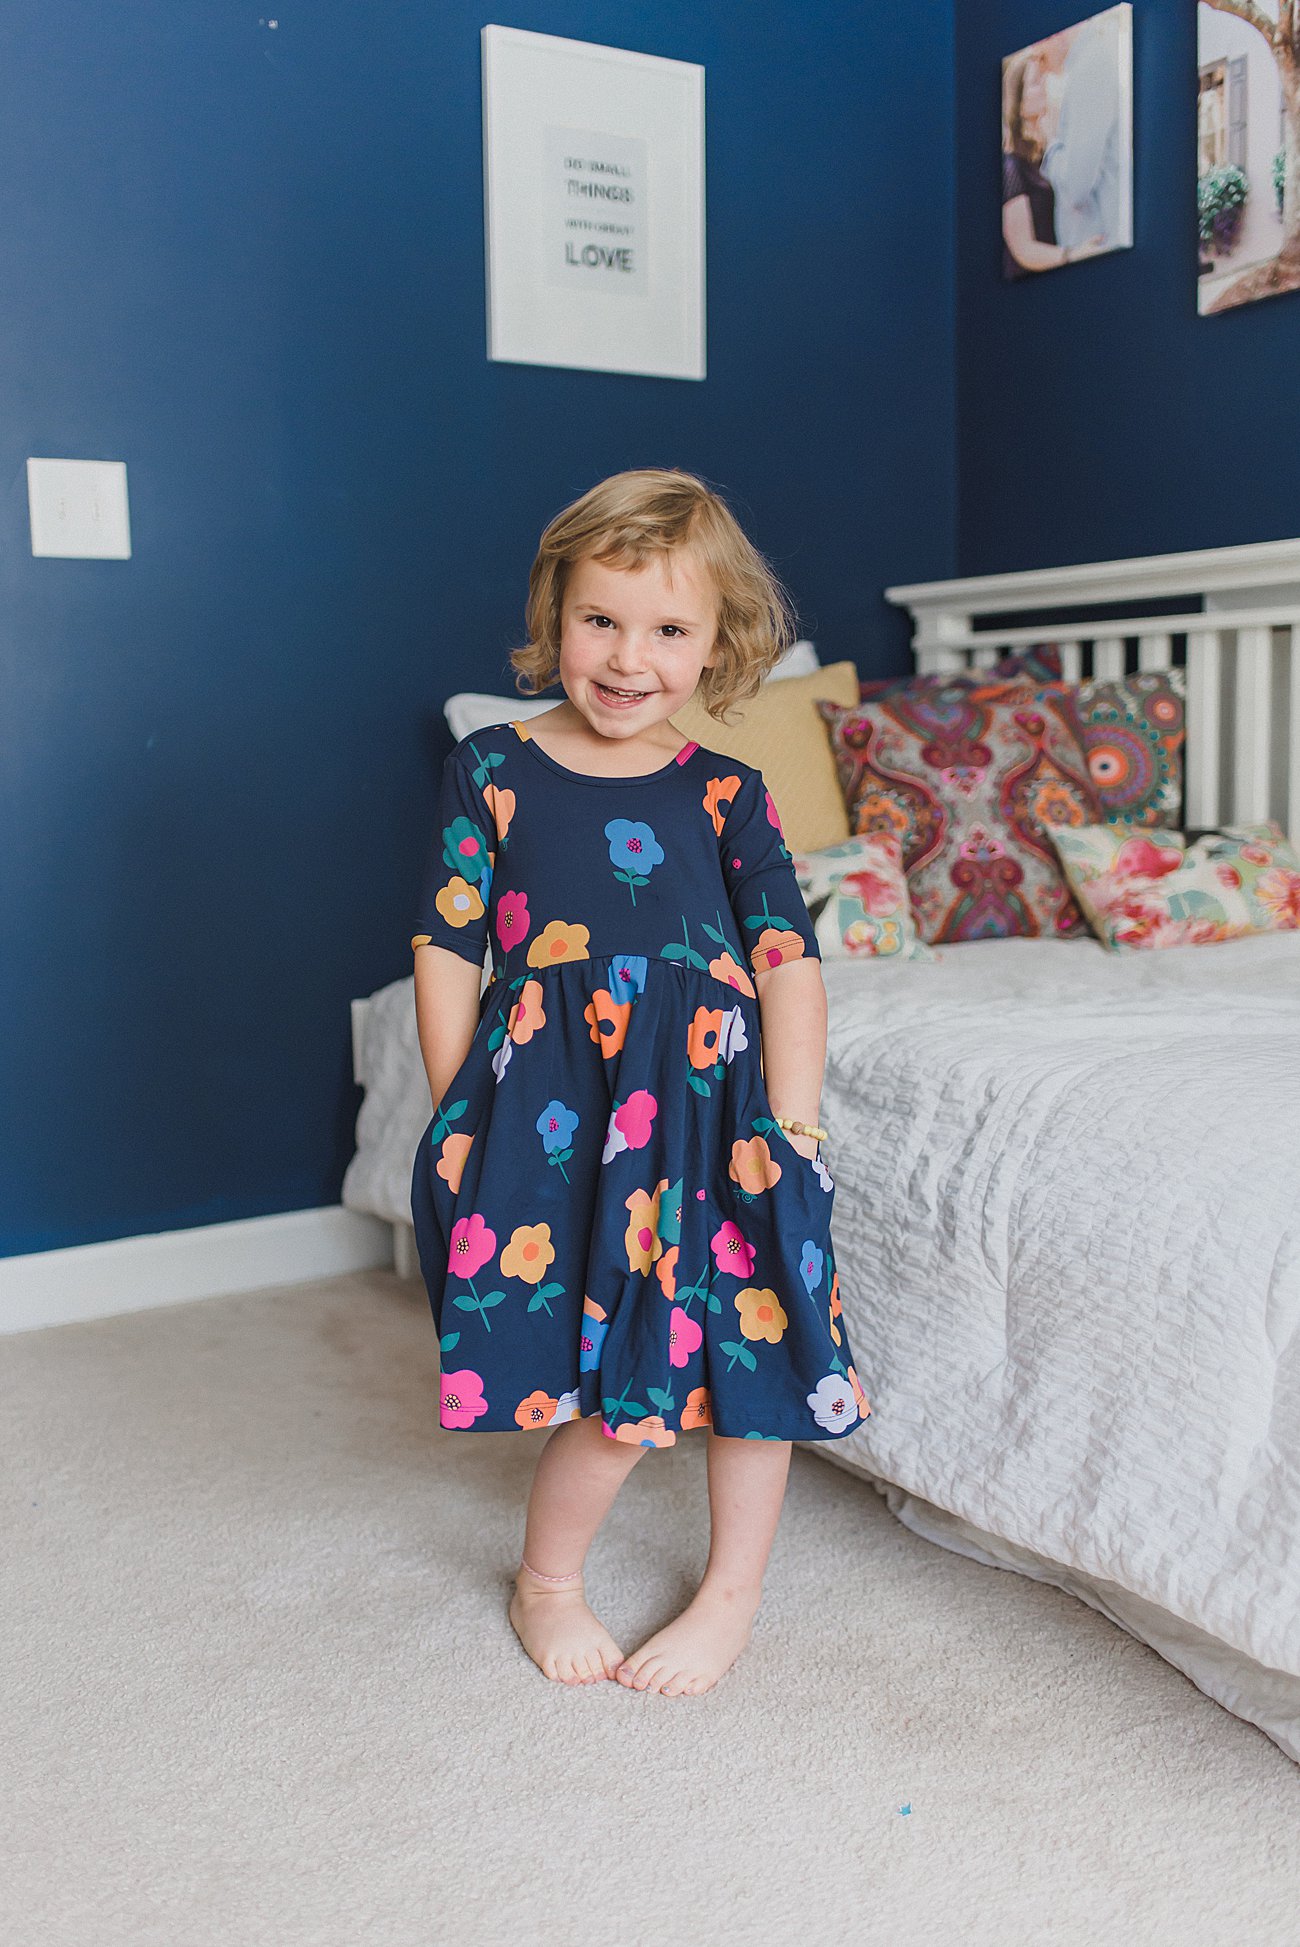 Hanna Andersson - Melody Scoop Neck Skater Dress - $36 - Stitch Fix Kids review